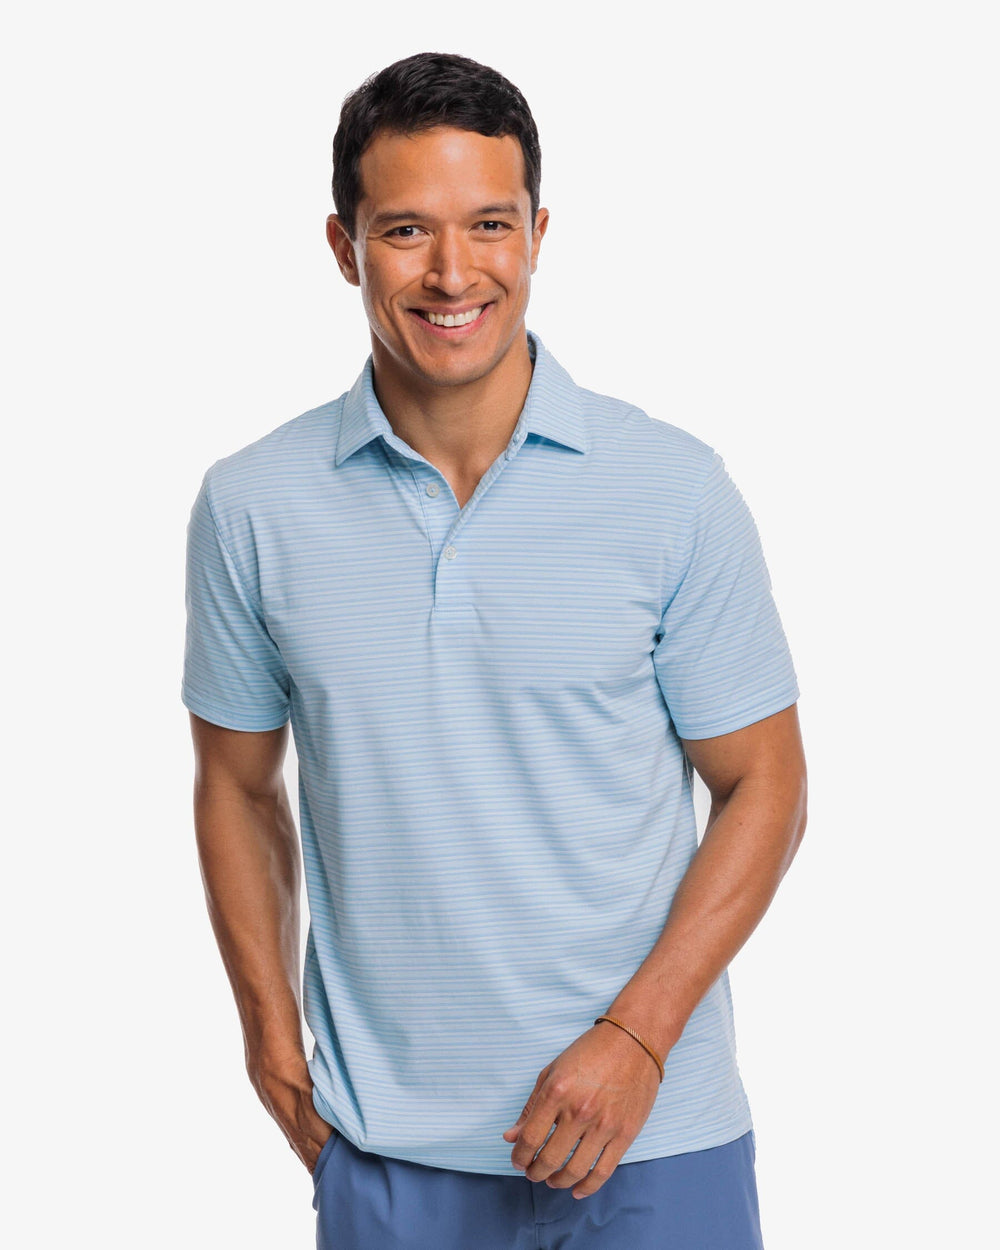 The front view of the Southern Tide brrr°®-eeze Bowen Stripe Performance Polo Shirt by Southern Tide - Rain Water